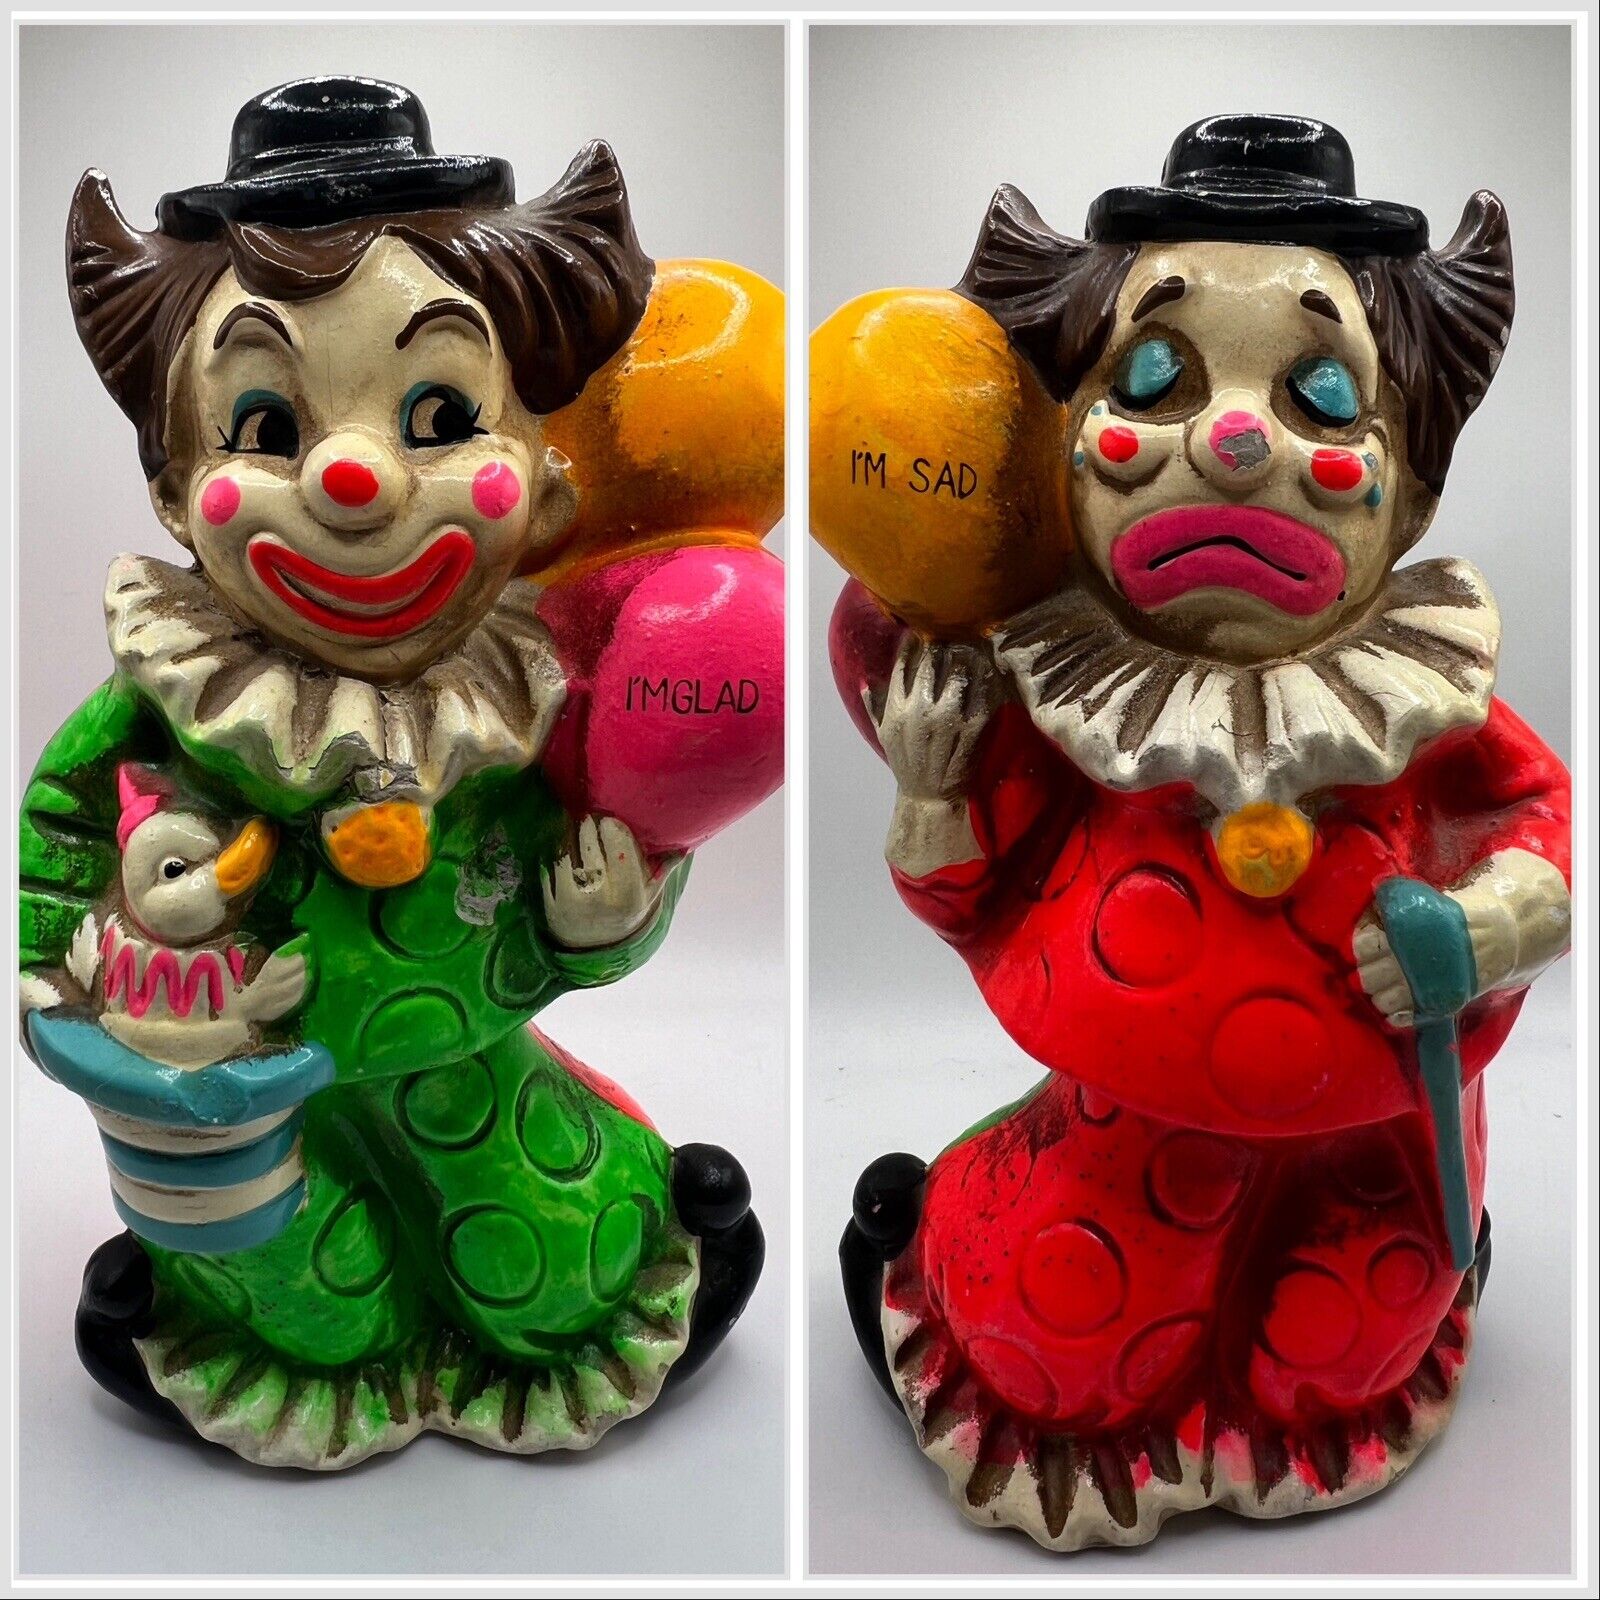 ROSSINI JAPAN VINTAGE 1960s 2 Sided BANK Happy /Sad Clown 8 1/2” High Colorful